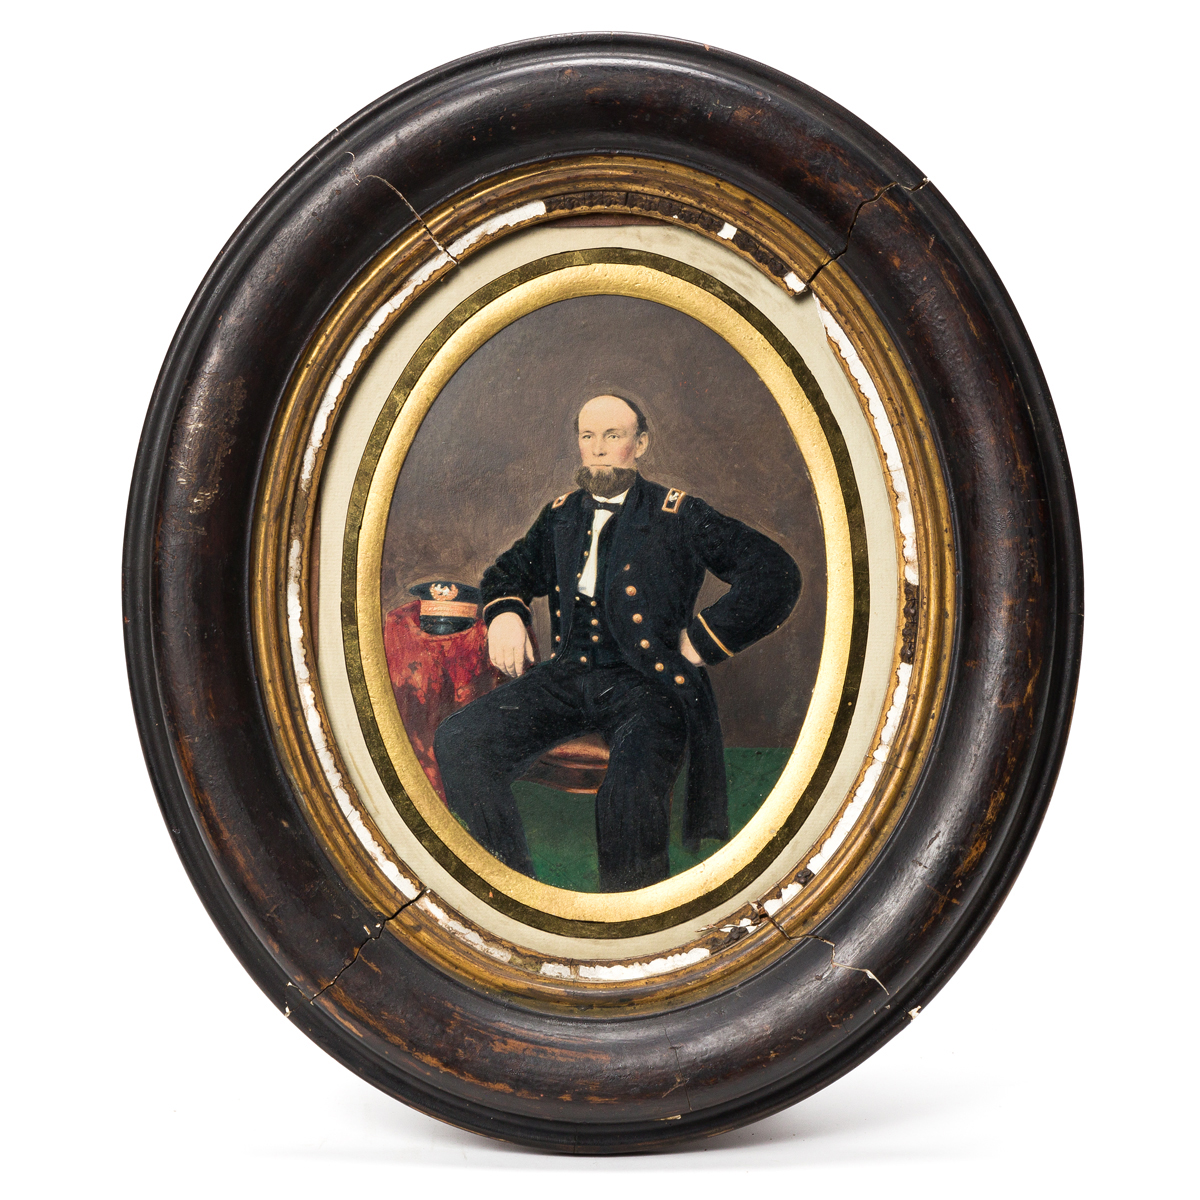 (CIVIL WAR--NAVY.) Portrait and papers of Ensign Christopher Flood.